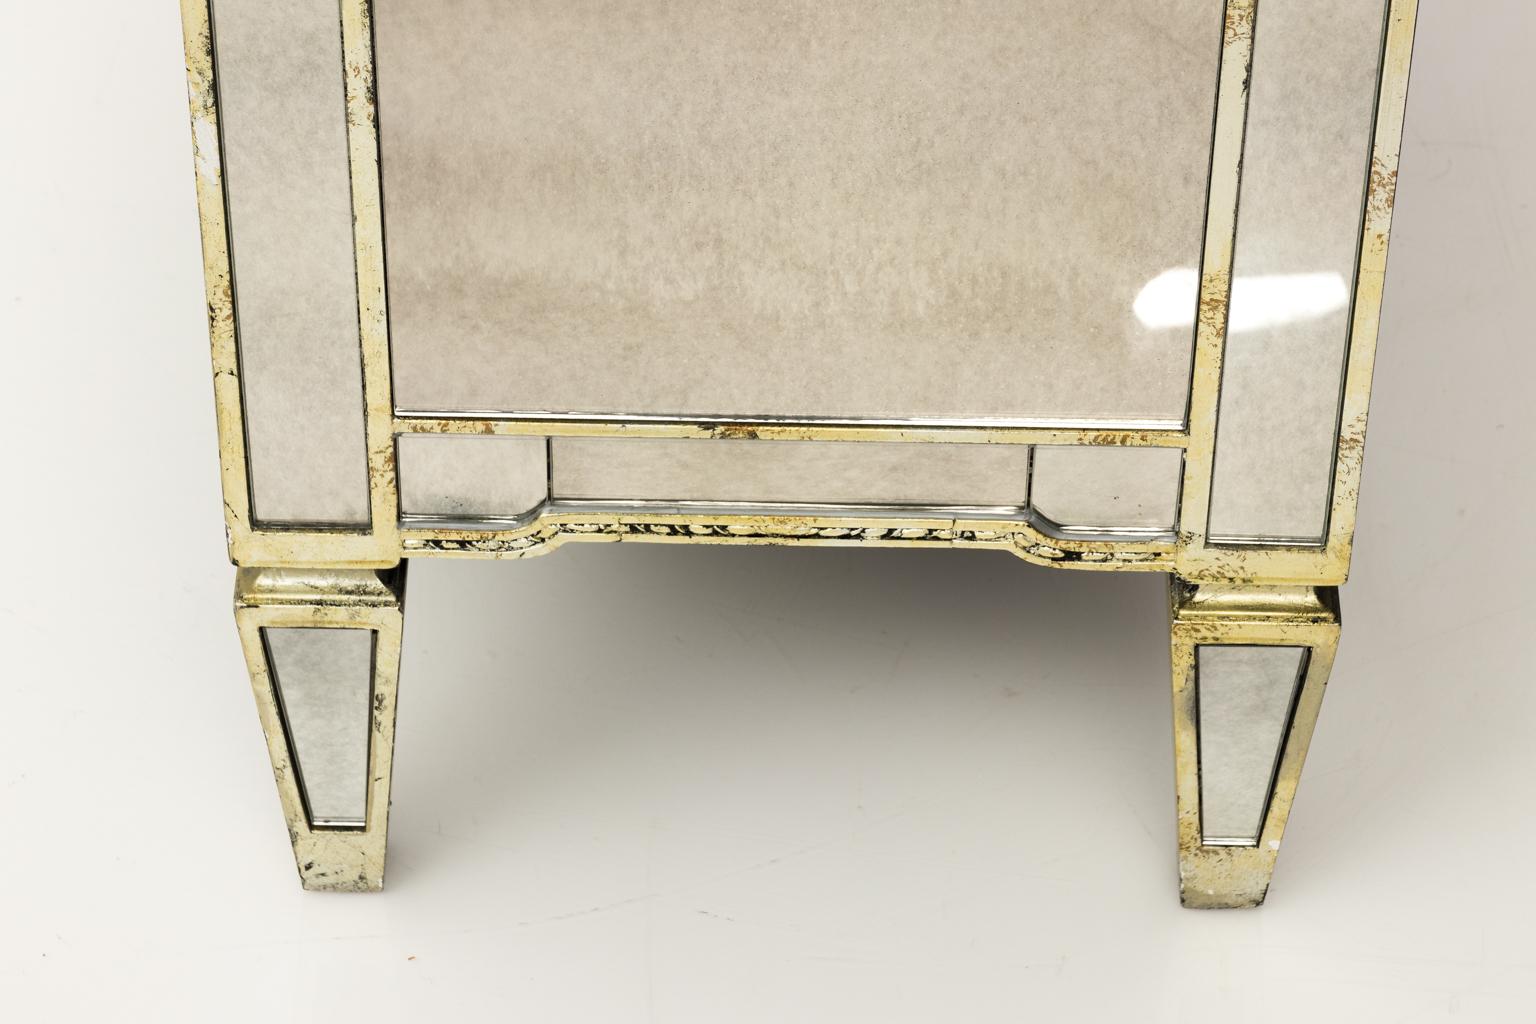 Contemporary Hollywood Regency style three-drawer chest of drawers with antiqued mirrored veneers and antiqued gold trim.
       